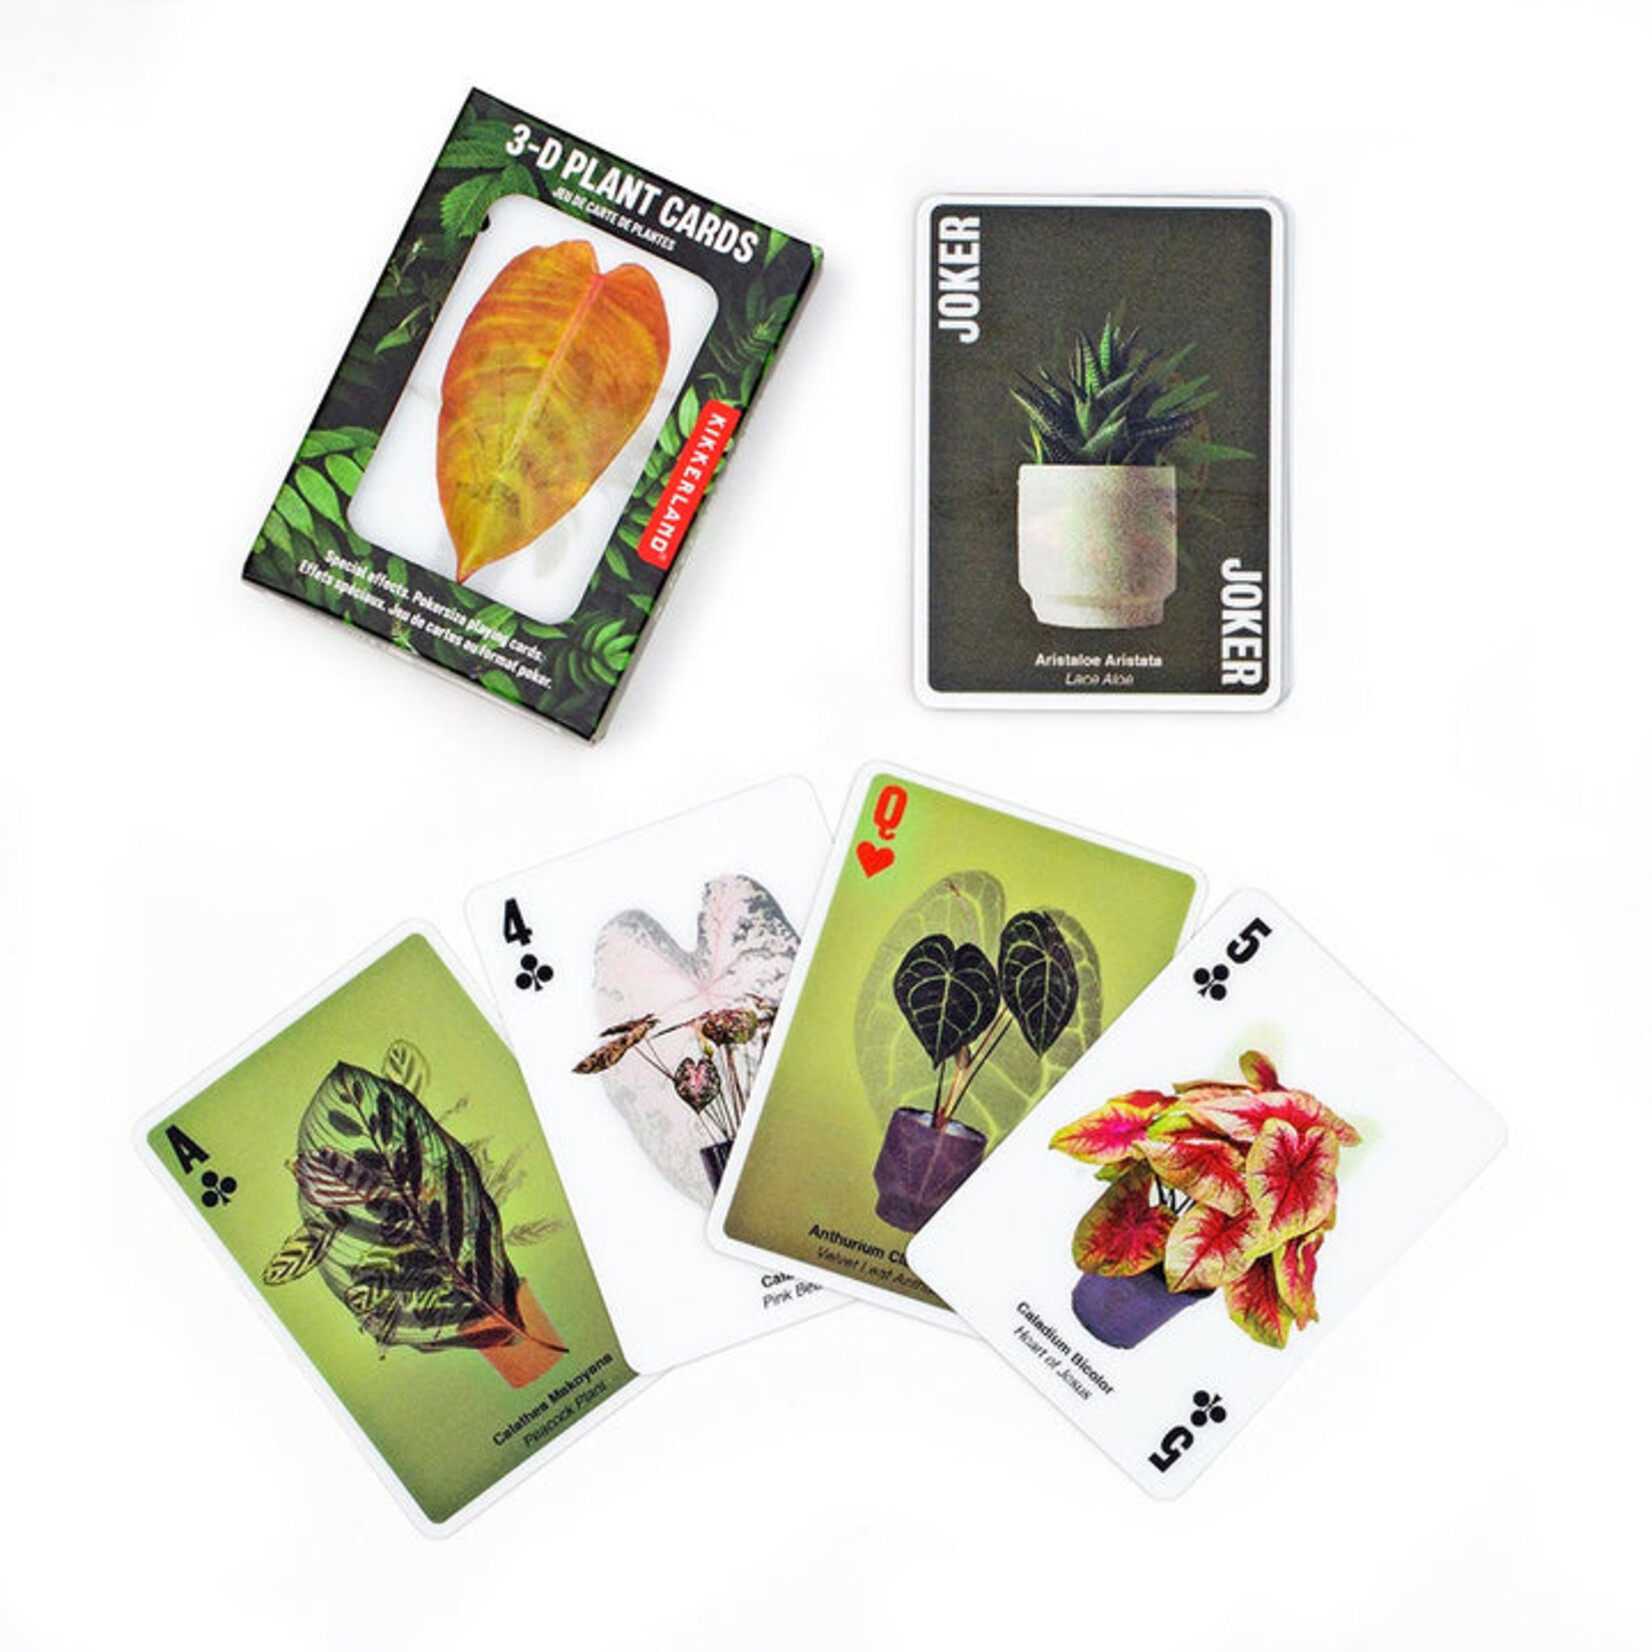 3D Plant Playing Cards